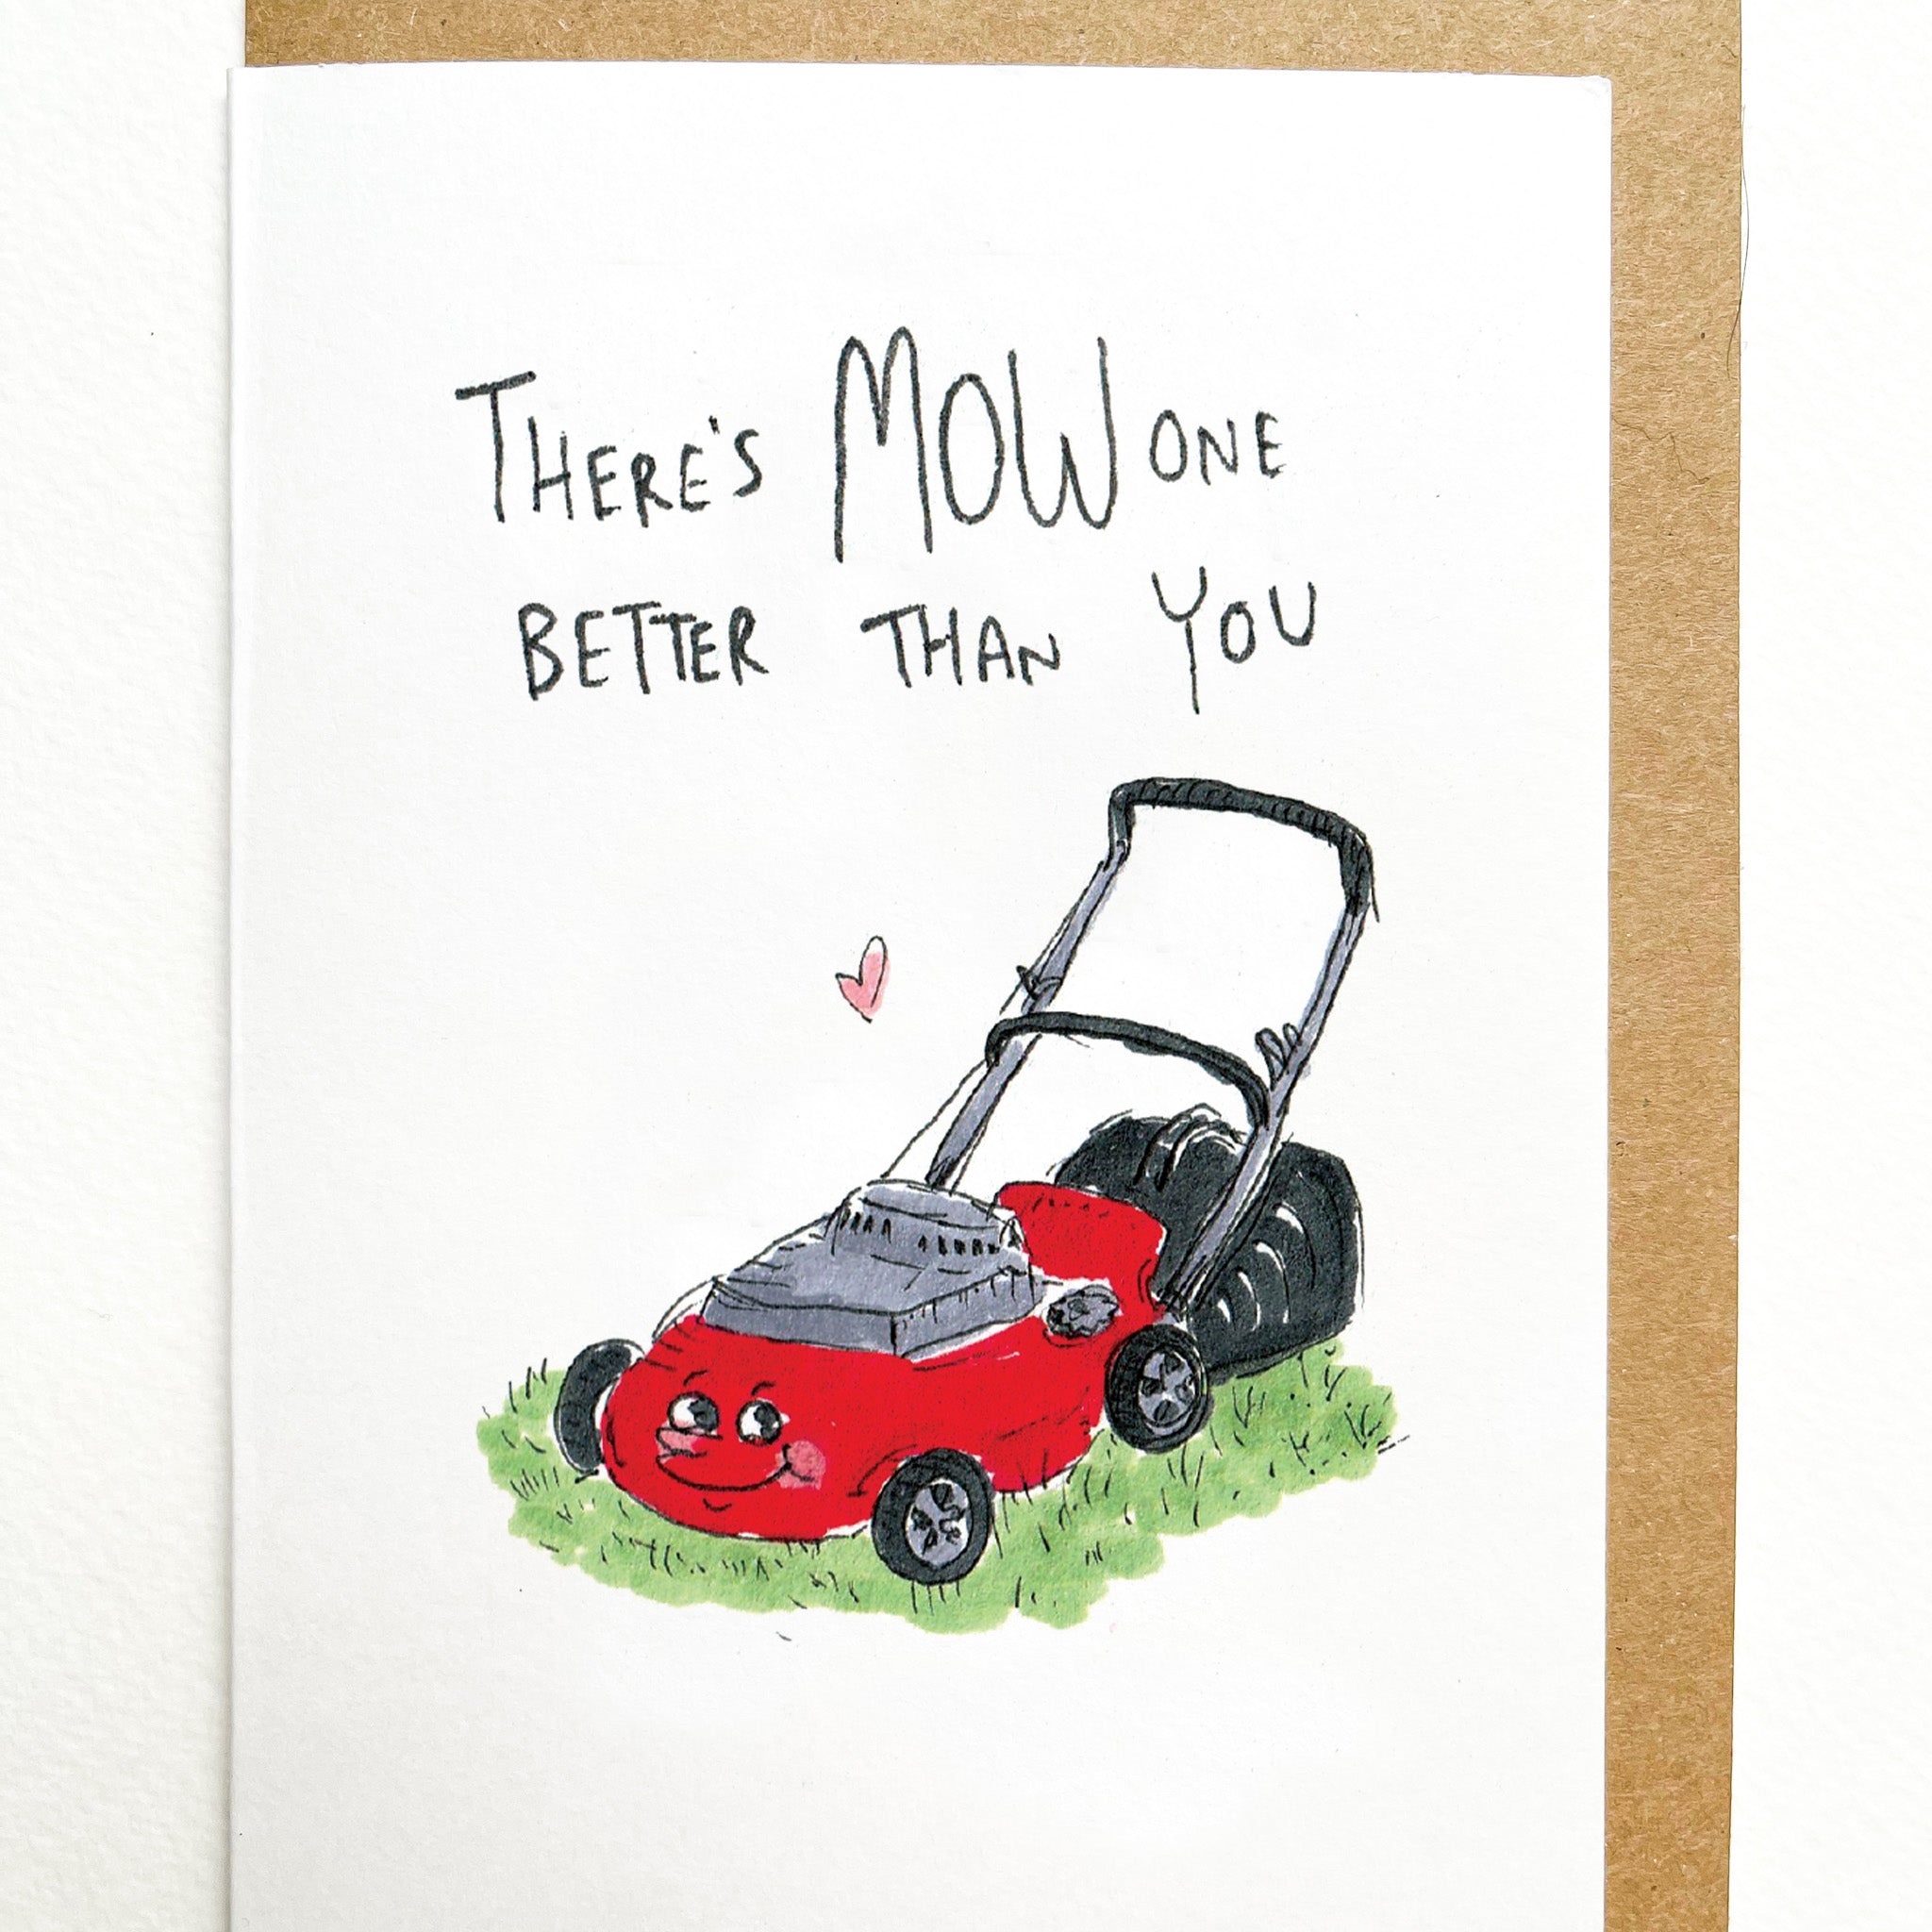 There's Mow One Else Like You